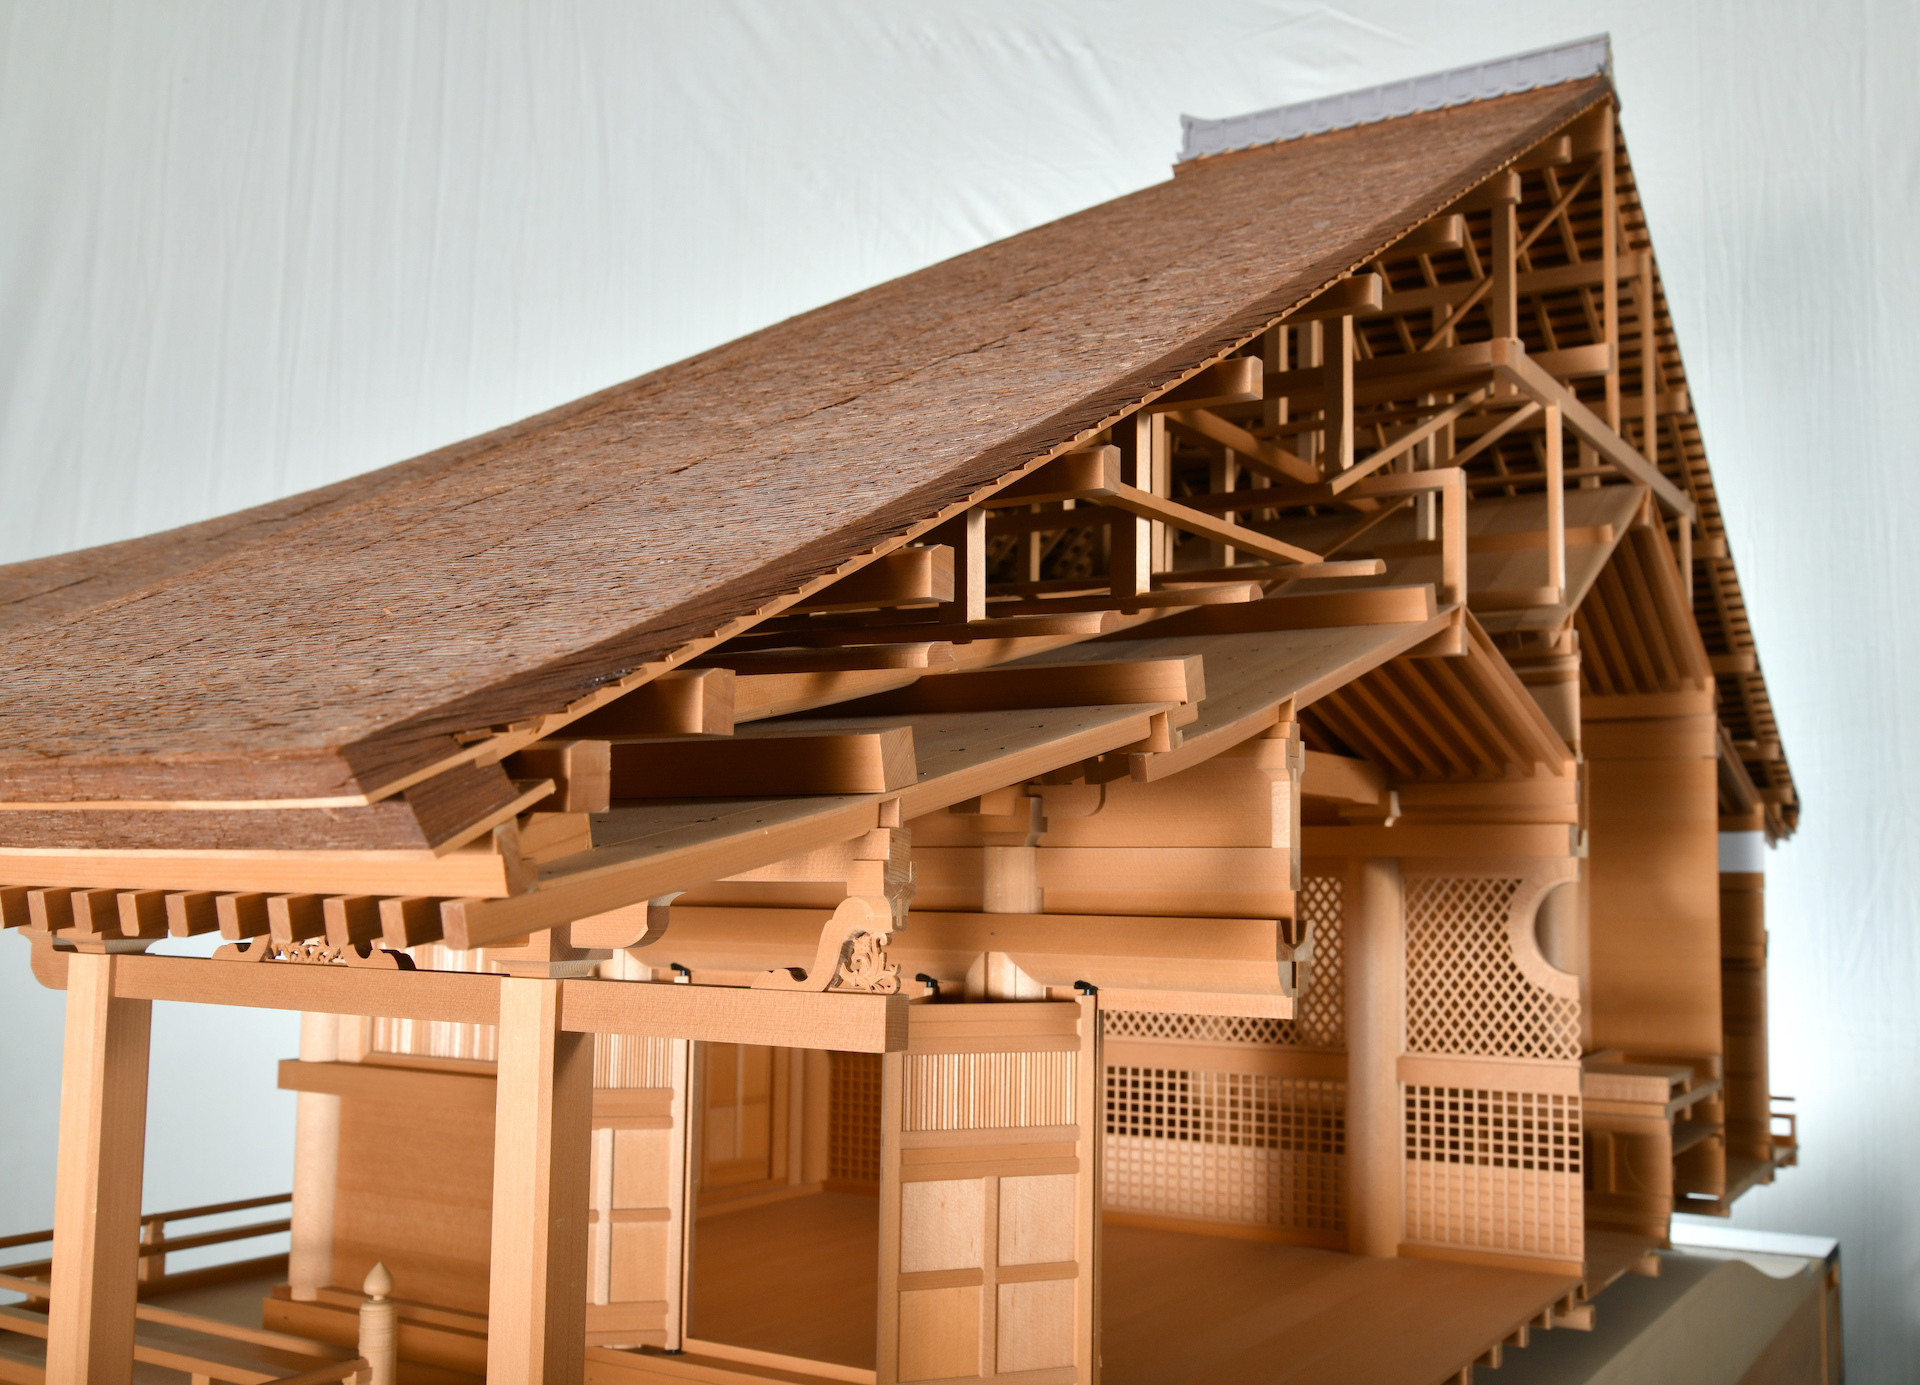 Japanese Architecture Traditional Skills And Natural Materials Art